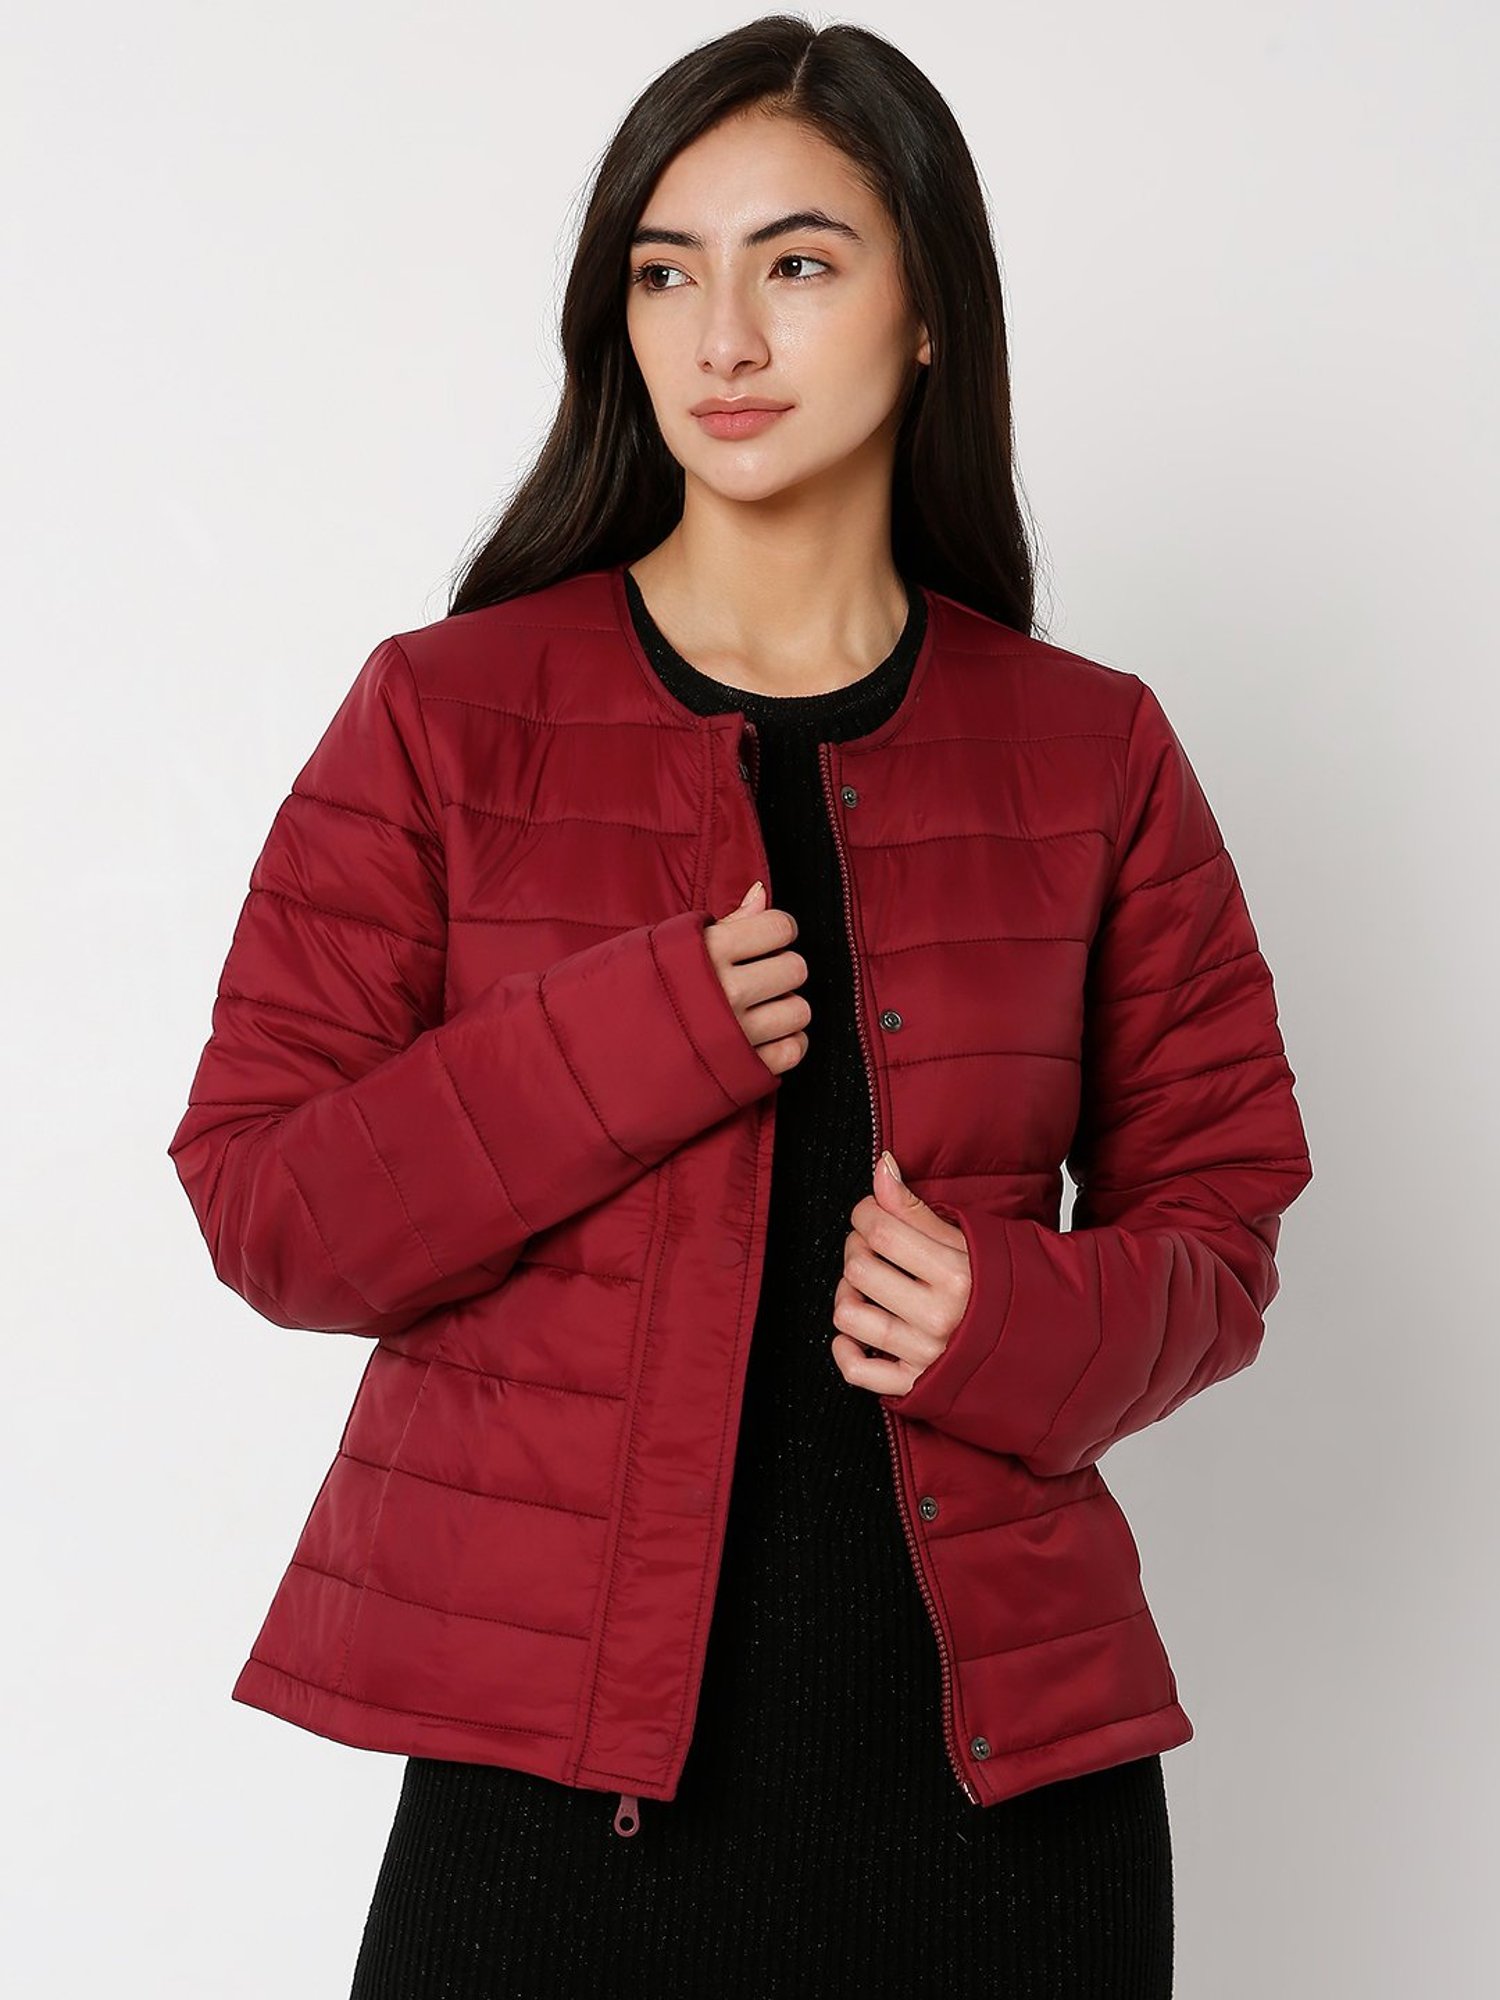 Maroon Leather Jacket for Women